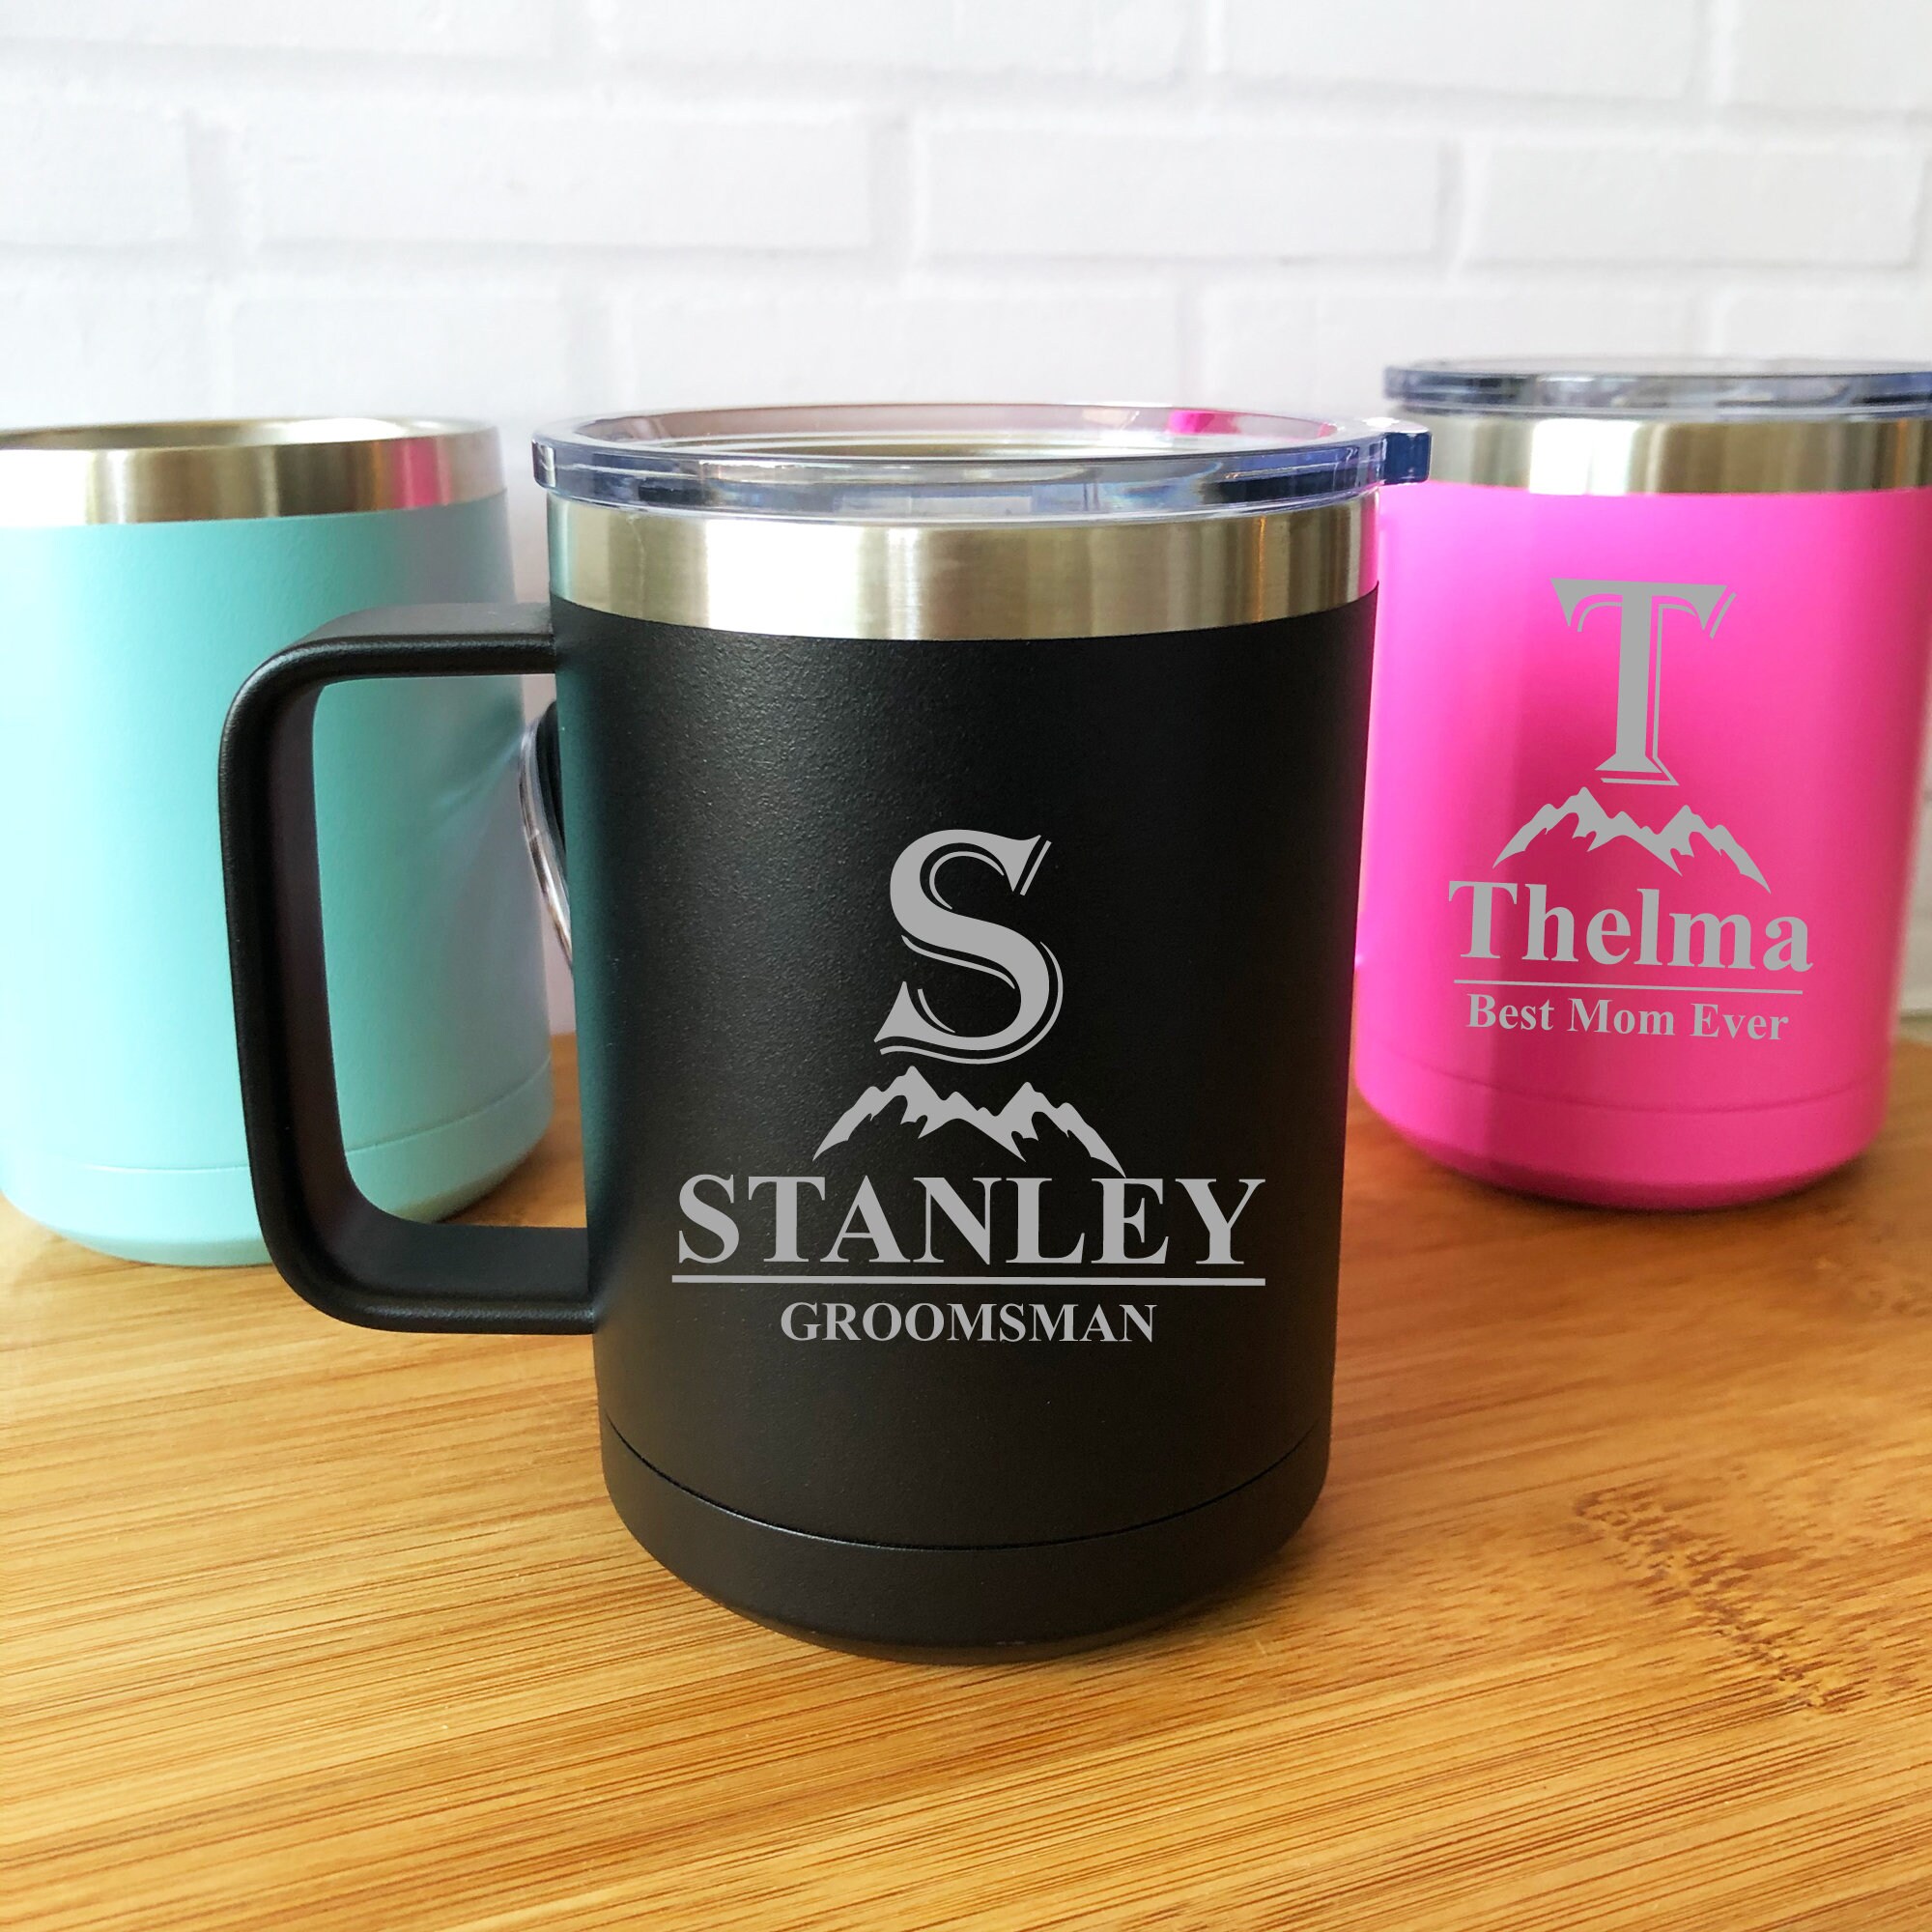 Stanley just released the best insulated mug ever